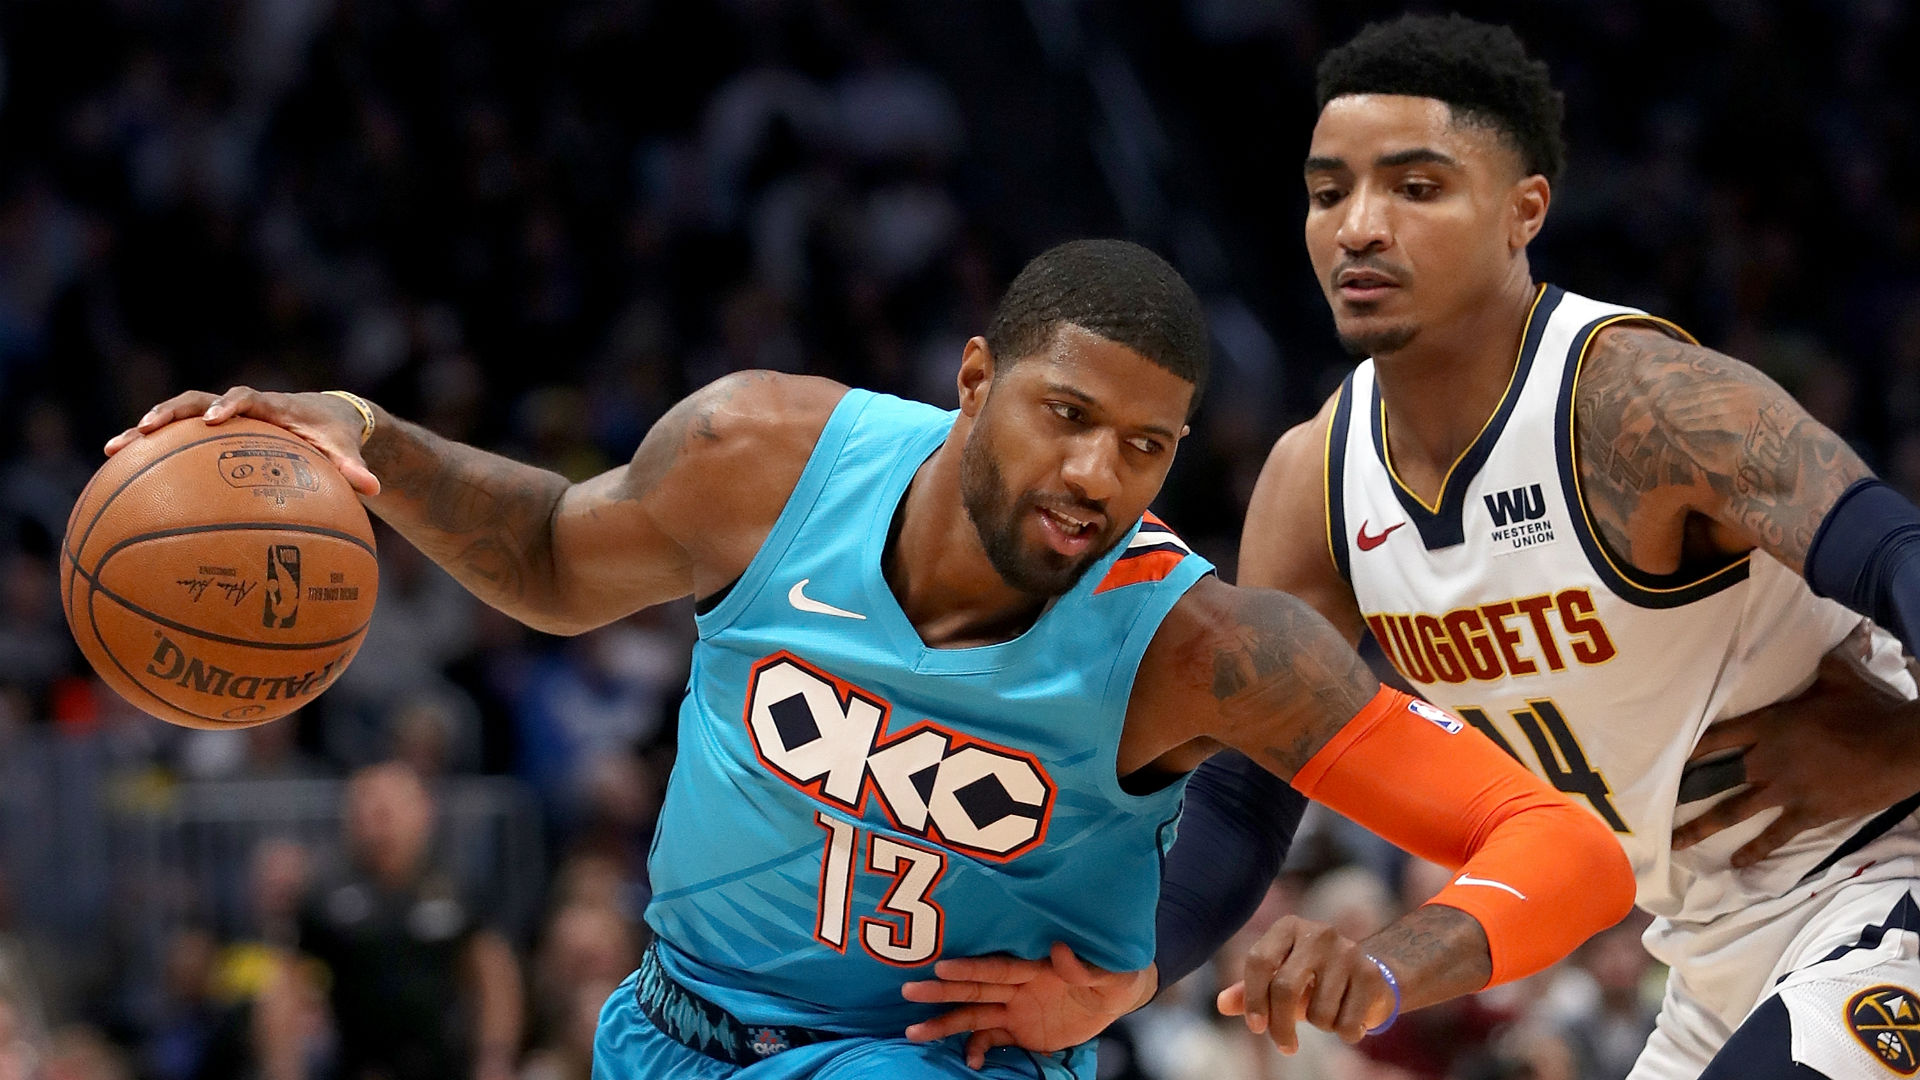 Are you buying or selling on the Nuggets and Thunder heading into playoffs? | NBA.com ...